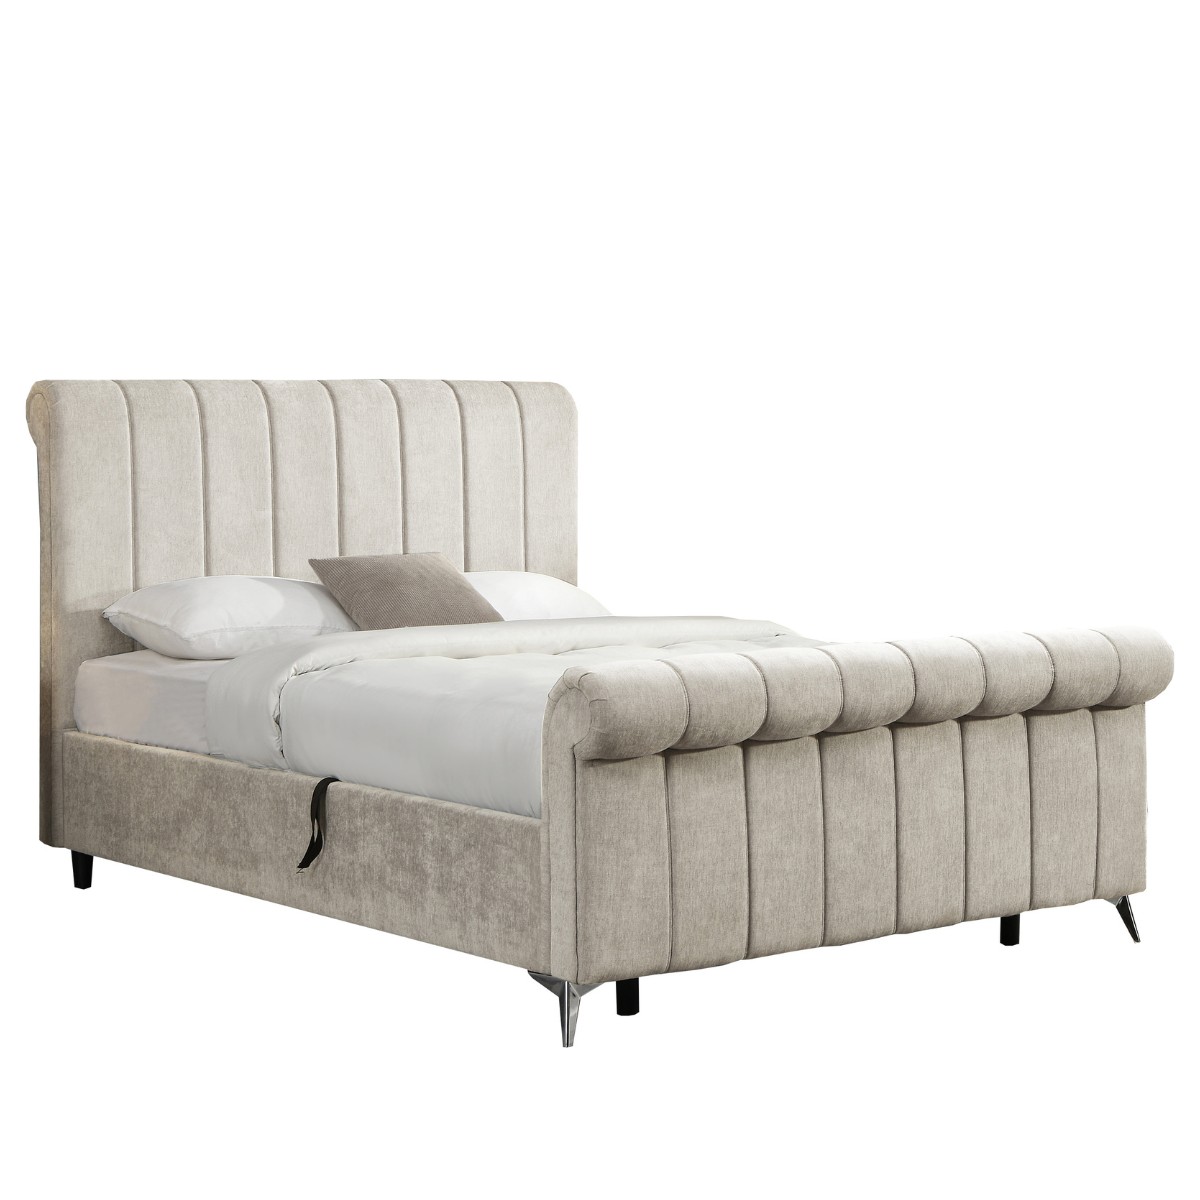 Corona Velvet Ottoman Bed with Chanel Tufting 1